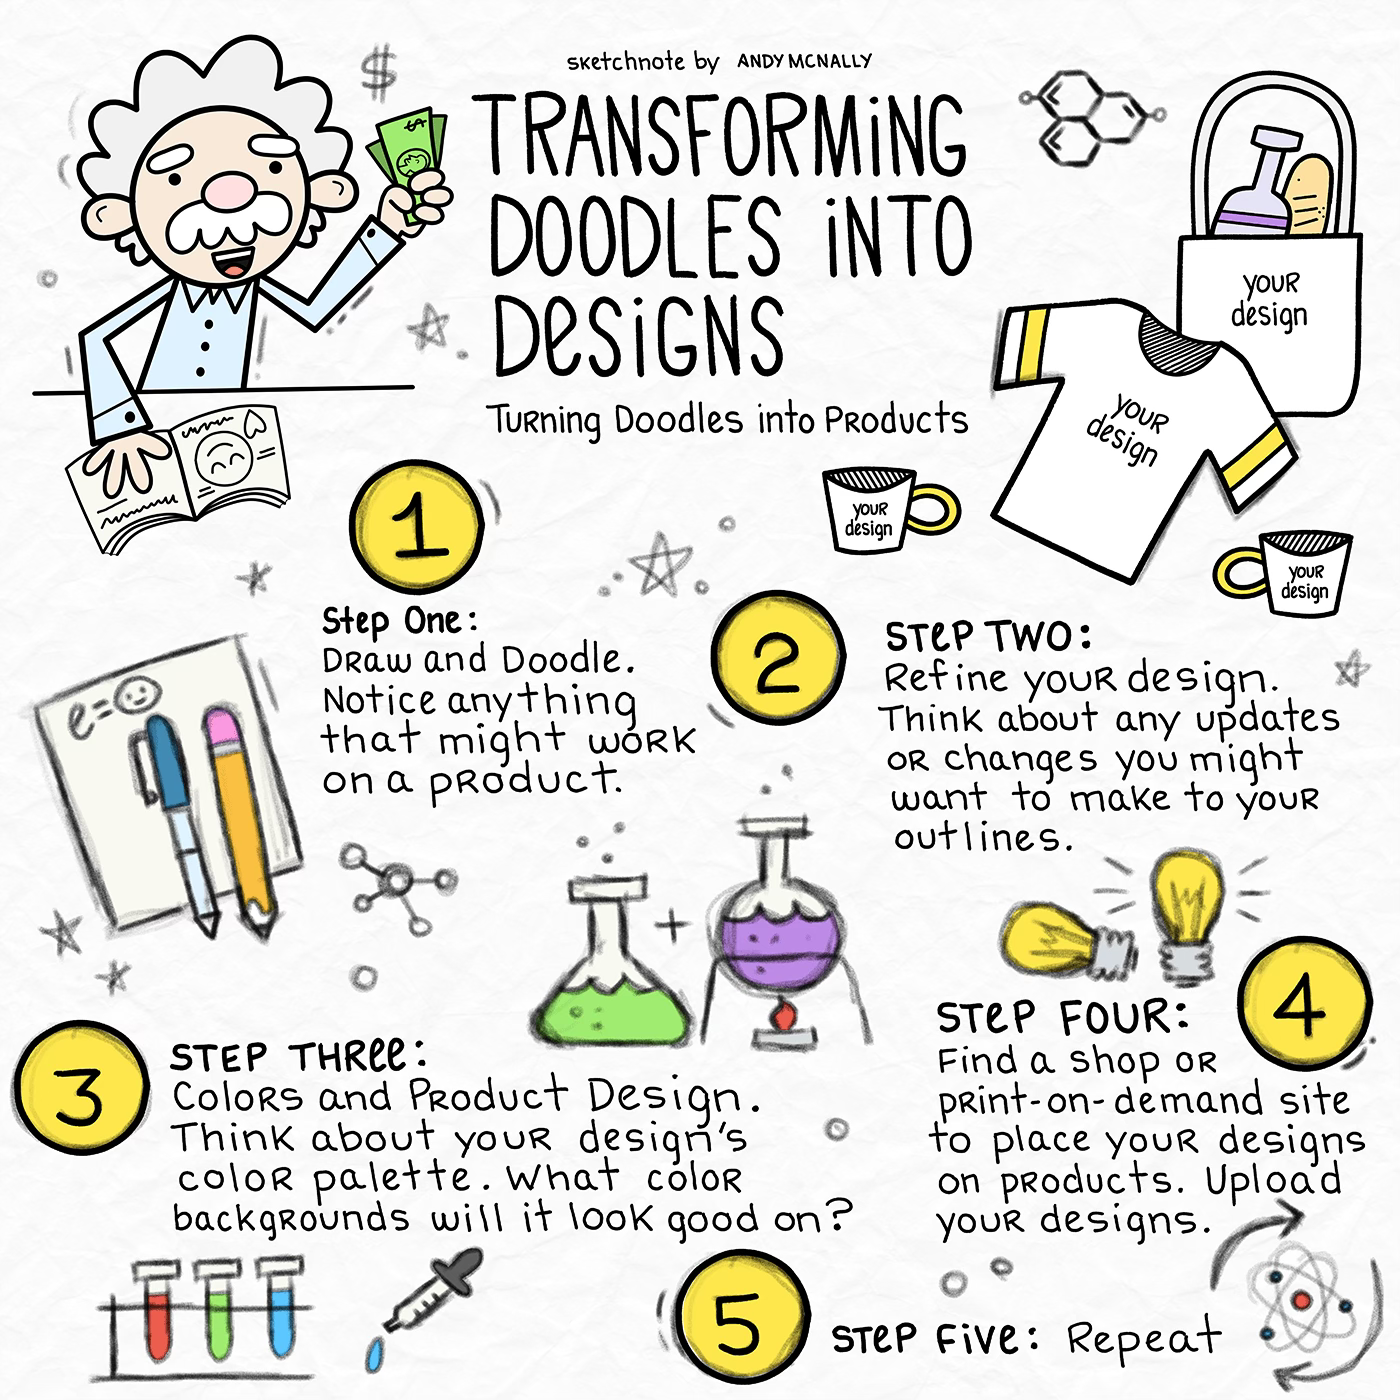 a sketchnote about transforming doodles into product designs